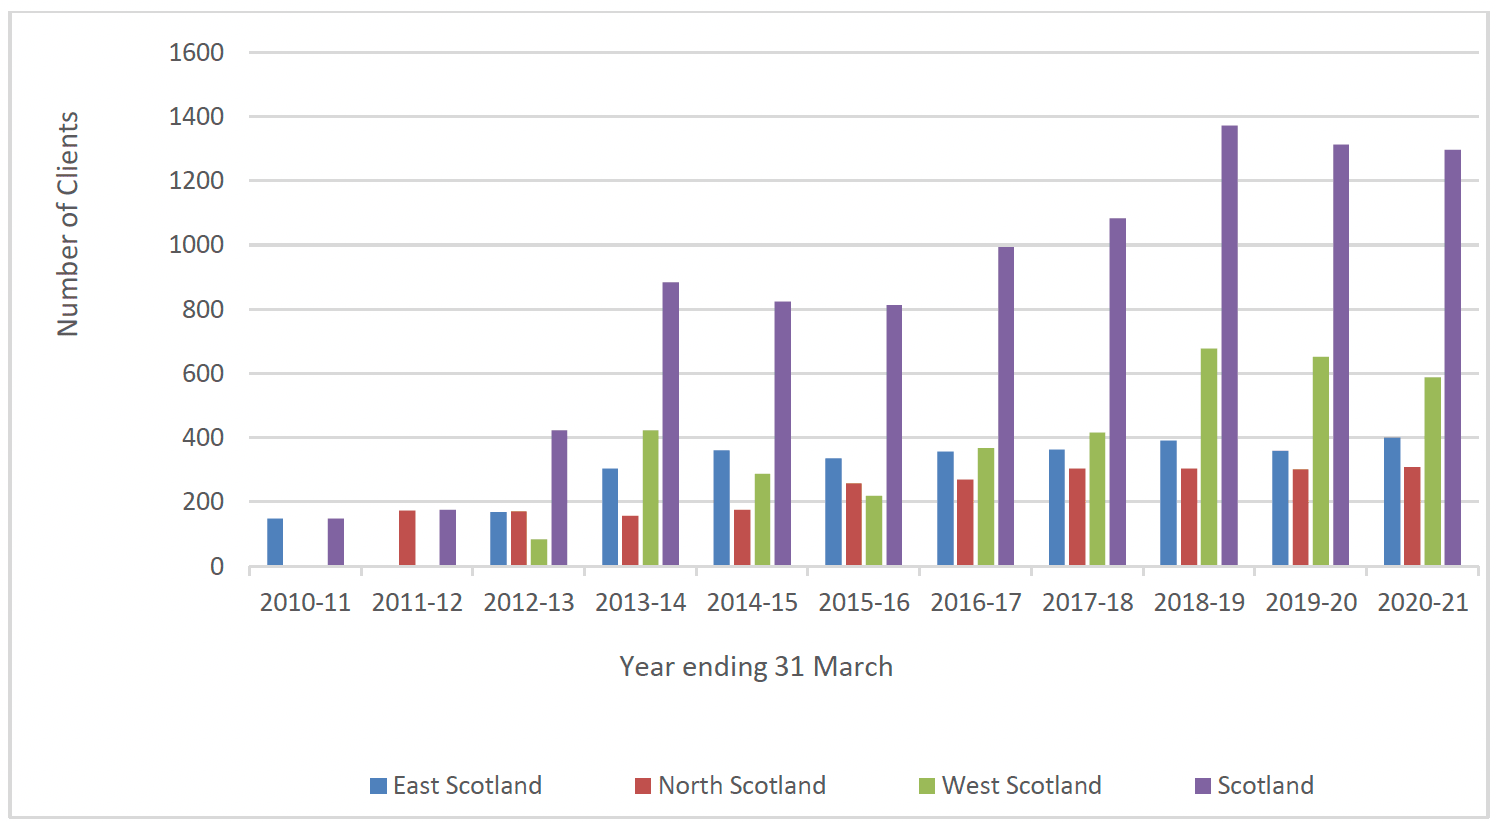 Chart 4 is a bar chart showing the number of clients enrolling onto FNP between 2010-11 and 2020-21 in Scotland overall and in the East, North and West regions of Scotland. There was a general pattern of increase in the number of clients enrolling in each region between 2010-11 and 2018-19 and the number enrolling between 2018-19 and 2020-21 largely stayed the same.